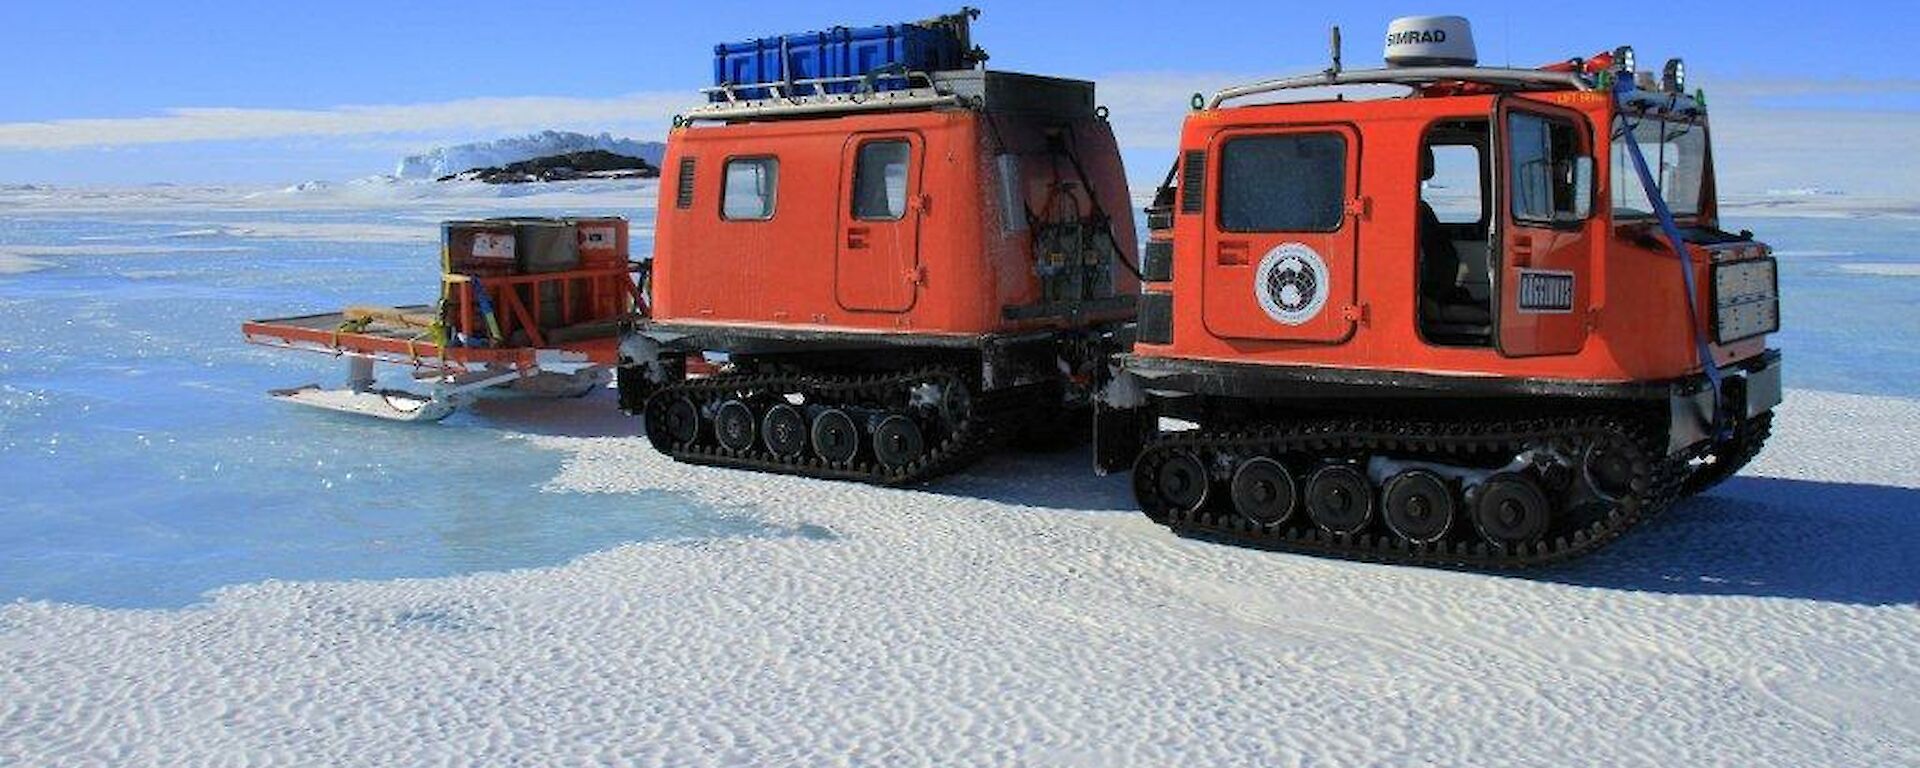 The orange Hägglunds parked on the sea ice as it makes its way to Taylor Glacier